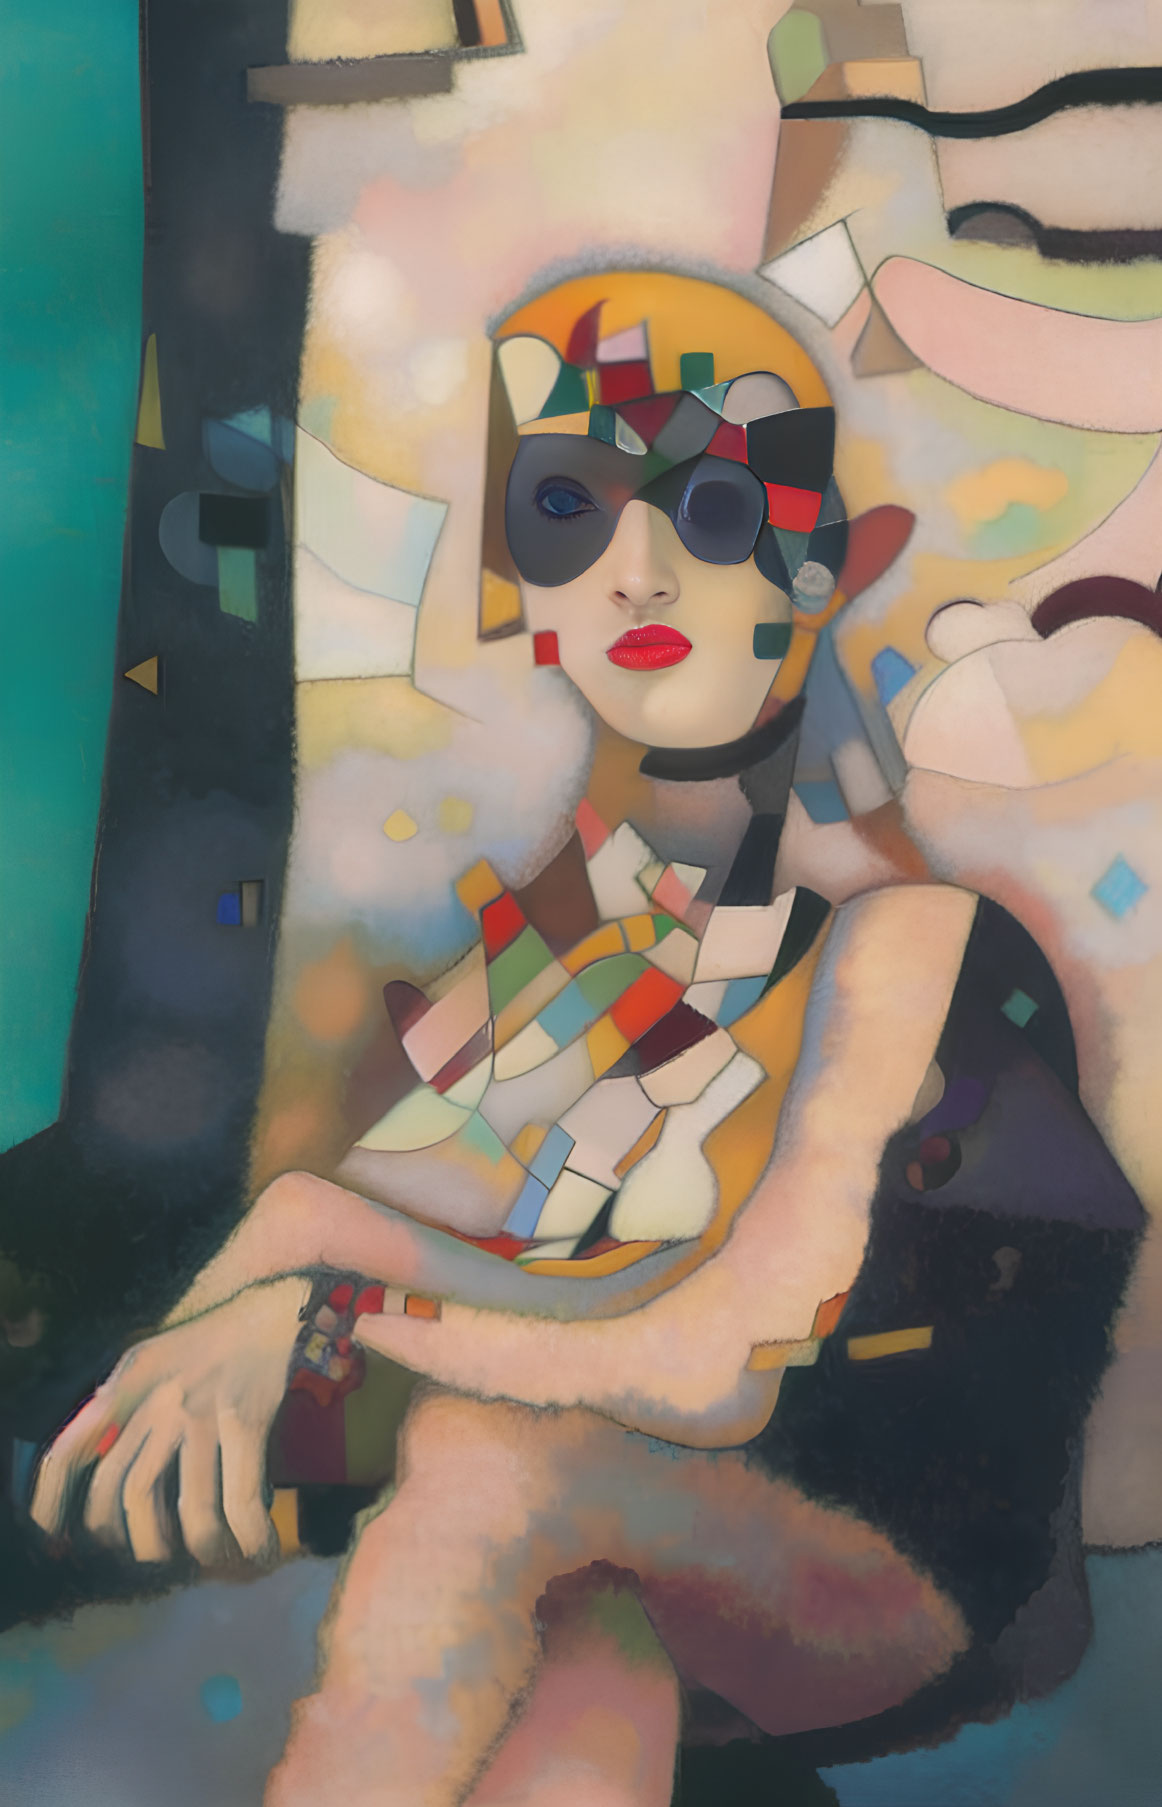 Abstract cubist portrait of female figure in sunglasses and colorful outfit